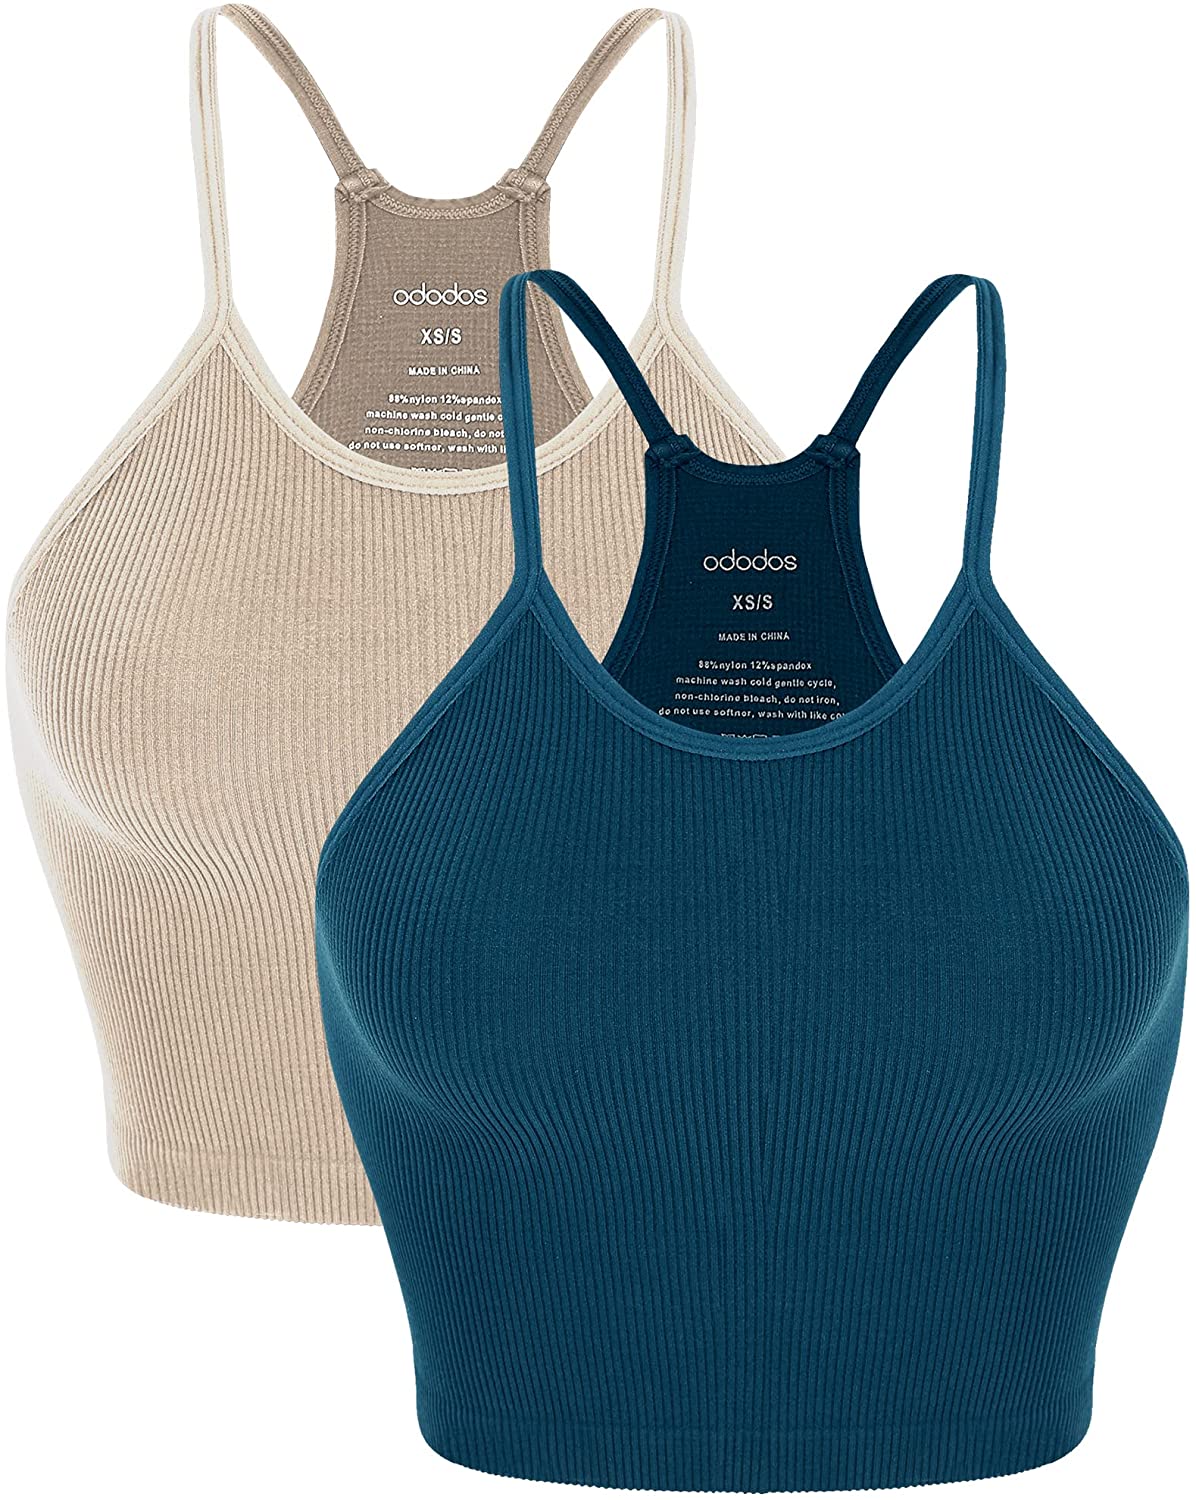 ODODOS Women's Crop 3-Pack Washed Seamless Rib-Knit Camisole Crop Tank Top